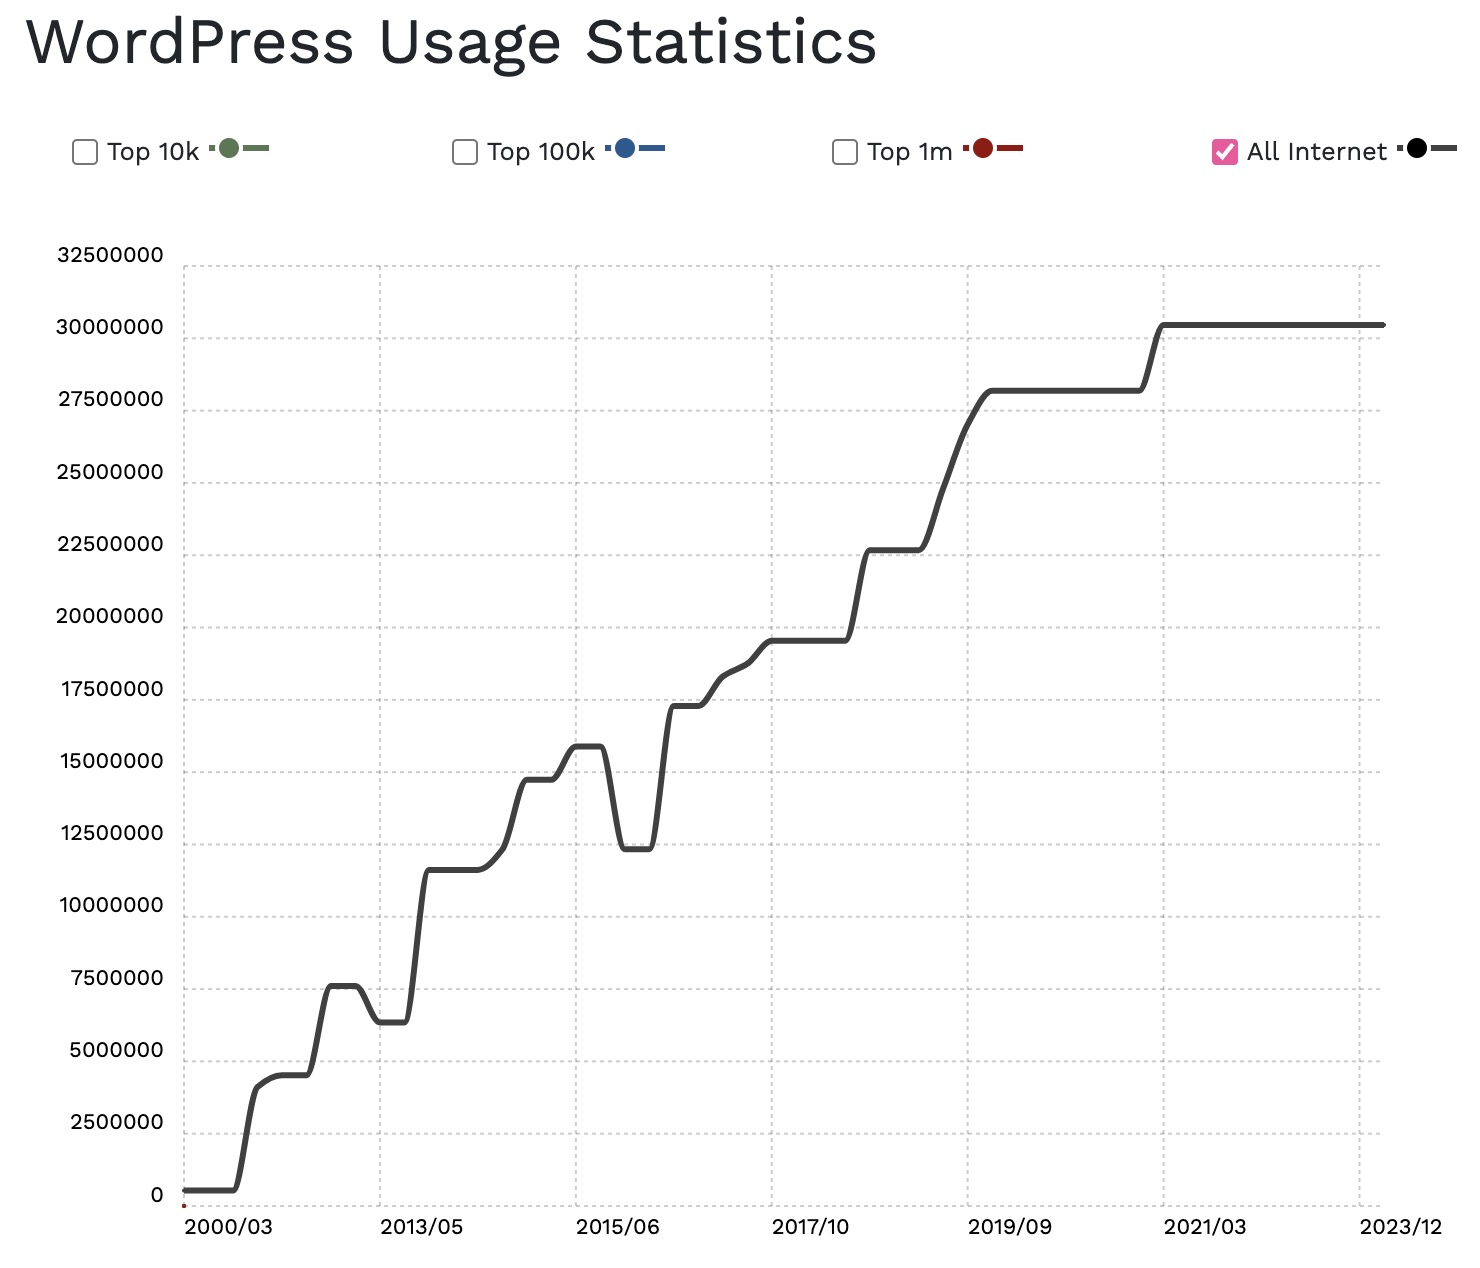 A line graph showing WordPress usage is up in a linear fashion from 0 to 30 million sites since 2003